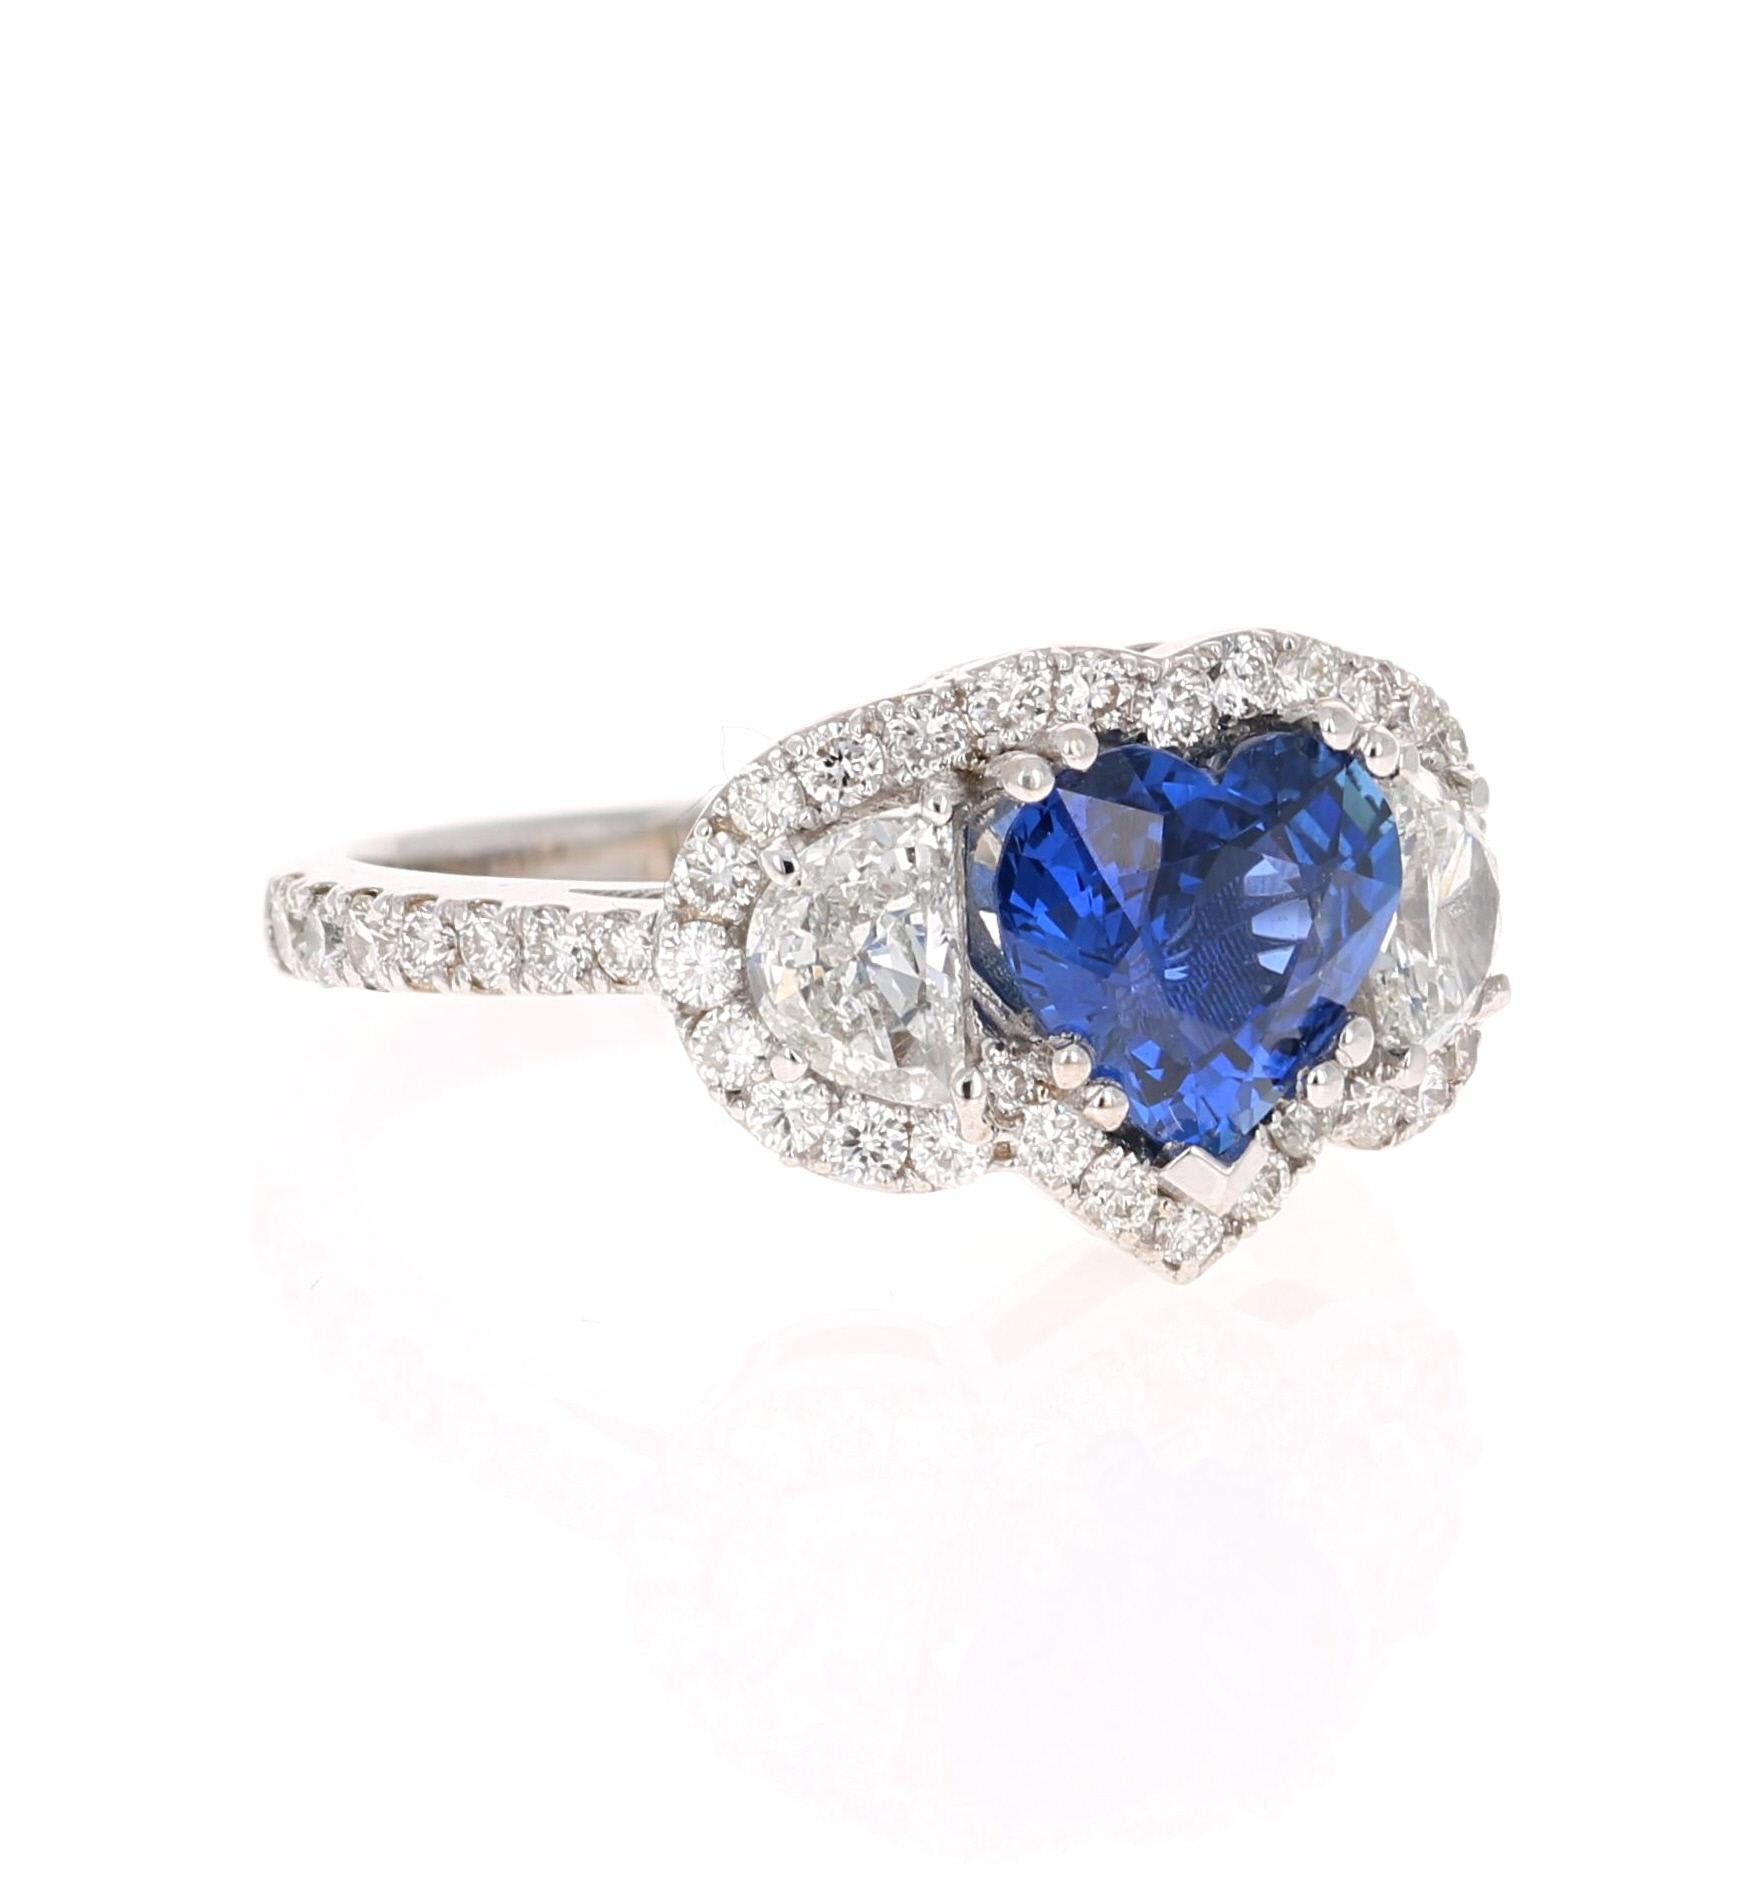 This ring has a gorgeous Heart Cut Blue Sapphire that weighs 1.93 Carats and is GIA Certified. The Sapphire is a natural Blue Heart Cut with Heat as per industry standards. The GIA Certificate Number is: 5182981580. 
It is embellished with 2 Half